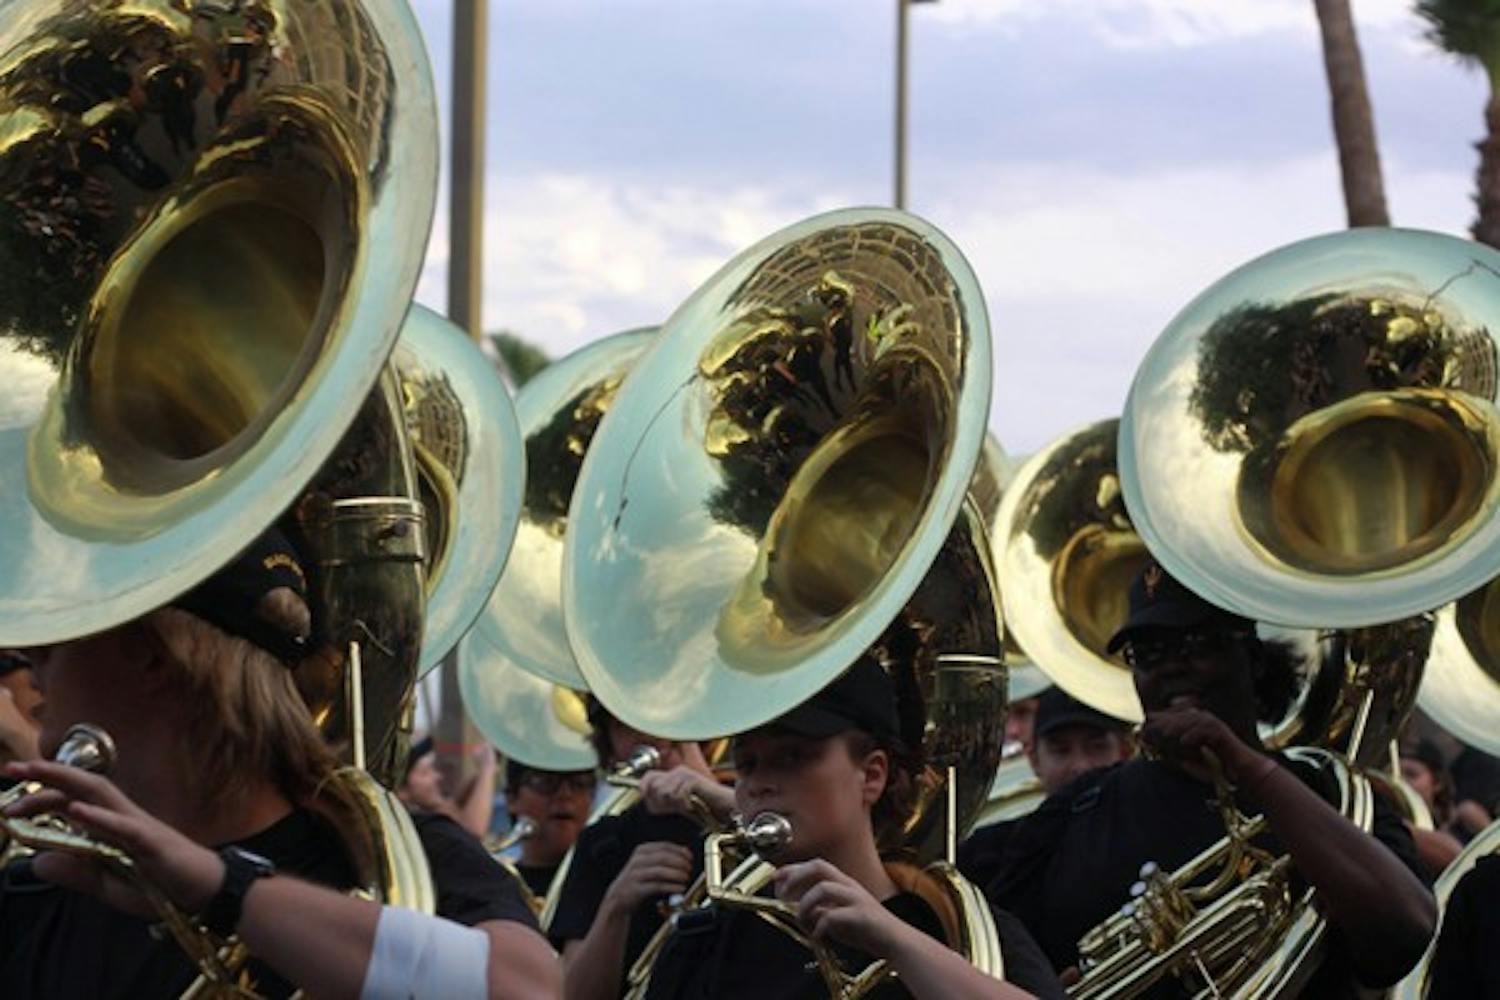 MARCHING TUNE: Sousaphone players from the ASU marching band play outside the Sun Devil Stadium when ASU played Missouri Sept. 9. The Sun Devils will play their next home game against USC Saturday night. (Photo by Lillian Reid)